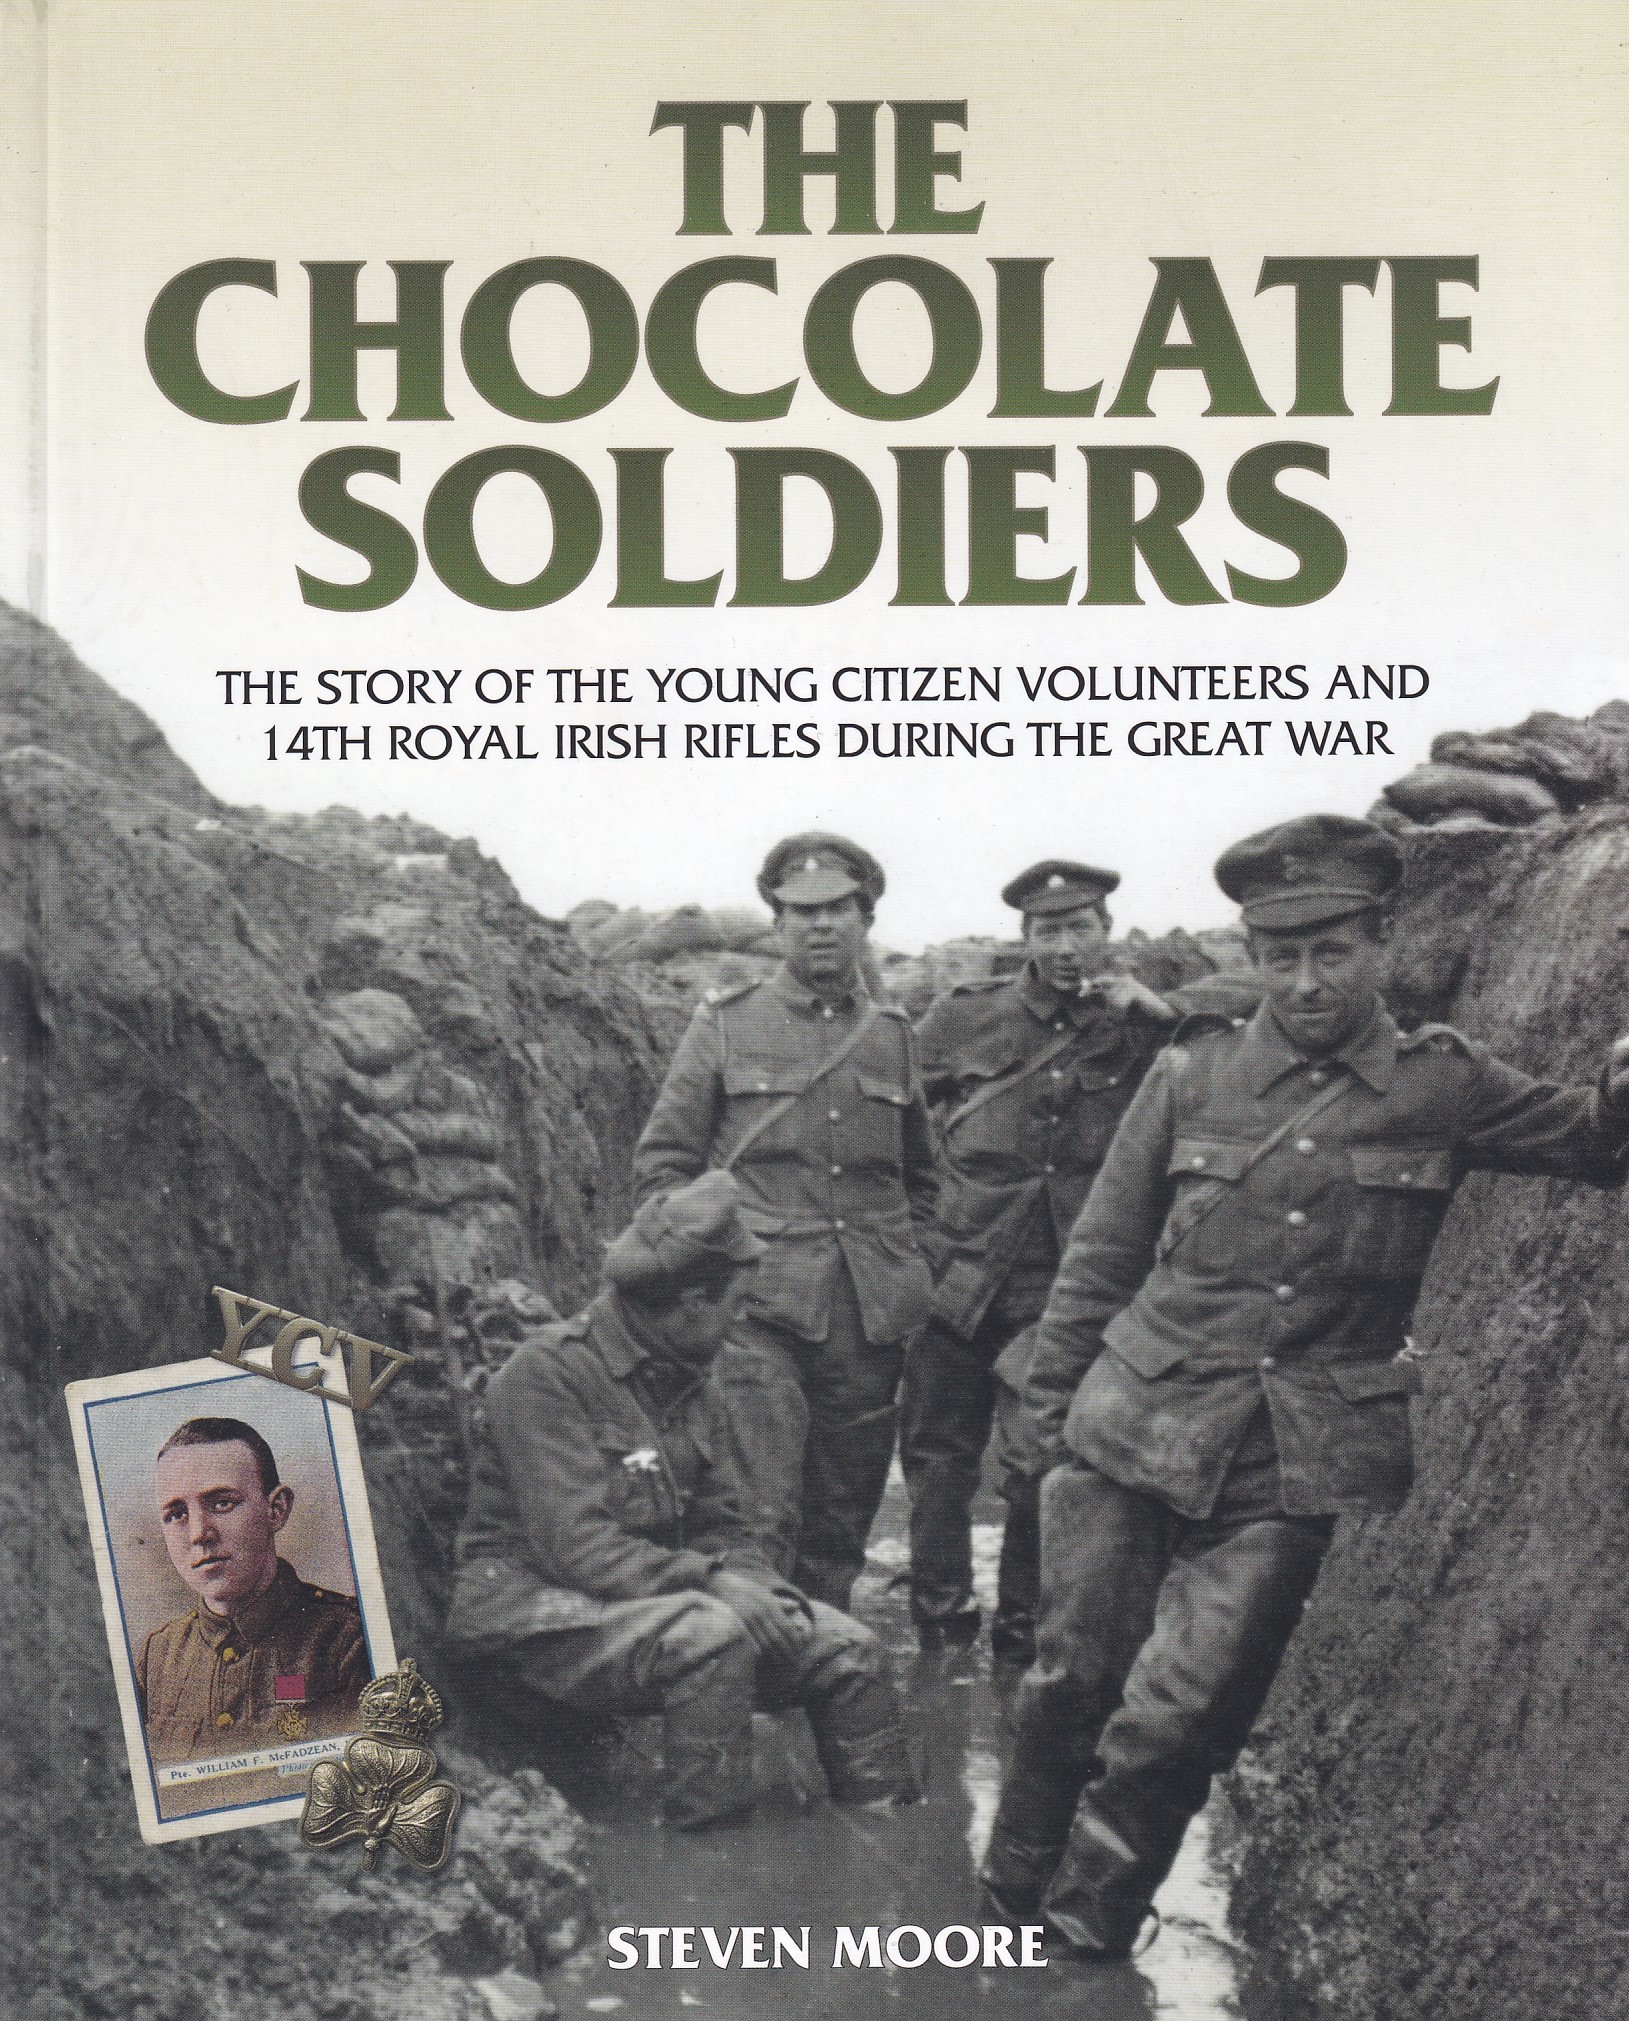 Chocolate Soldiers: The Story of the Young Citizen Volunteers and 14th Royal irish Rifles during the Great War | Moore, Steven | Charlie Byrne's